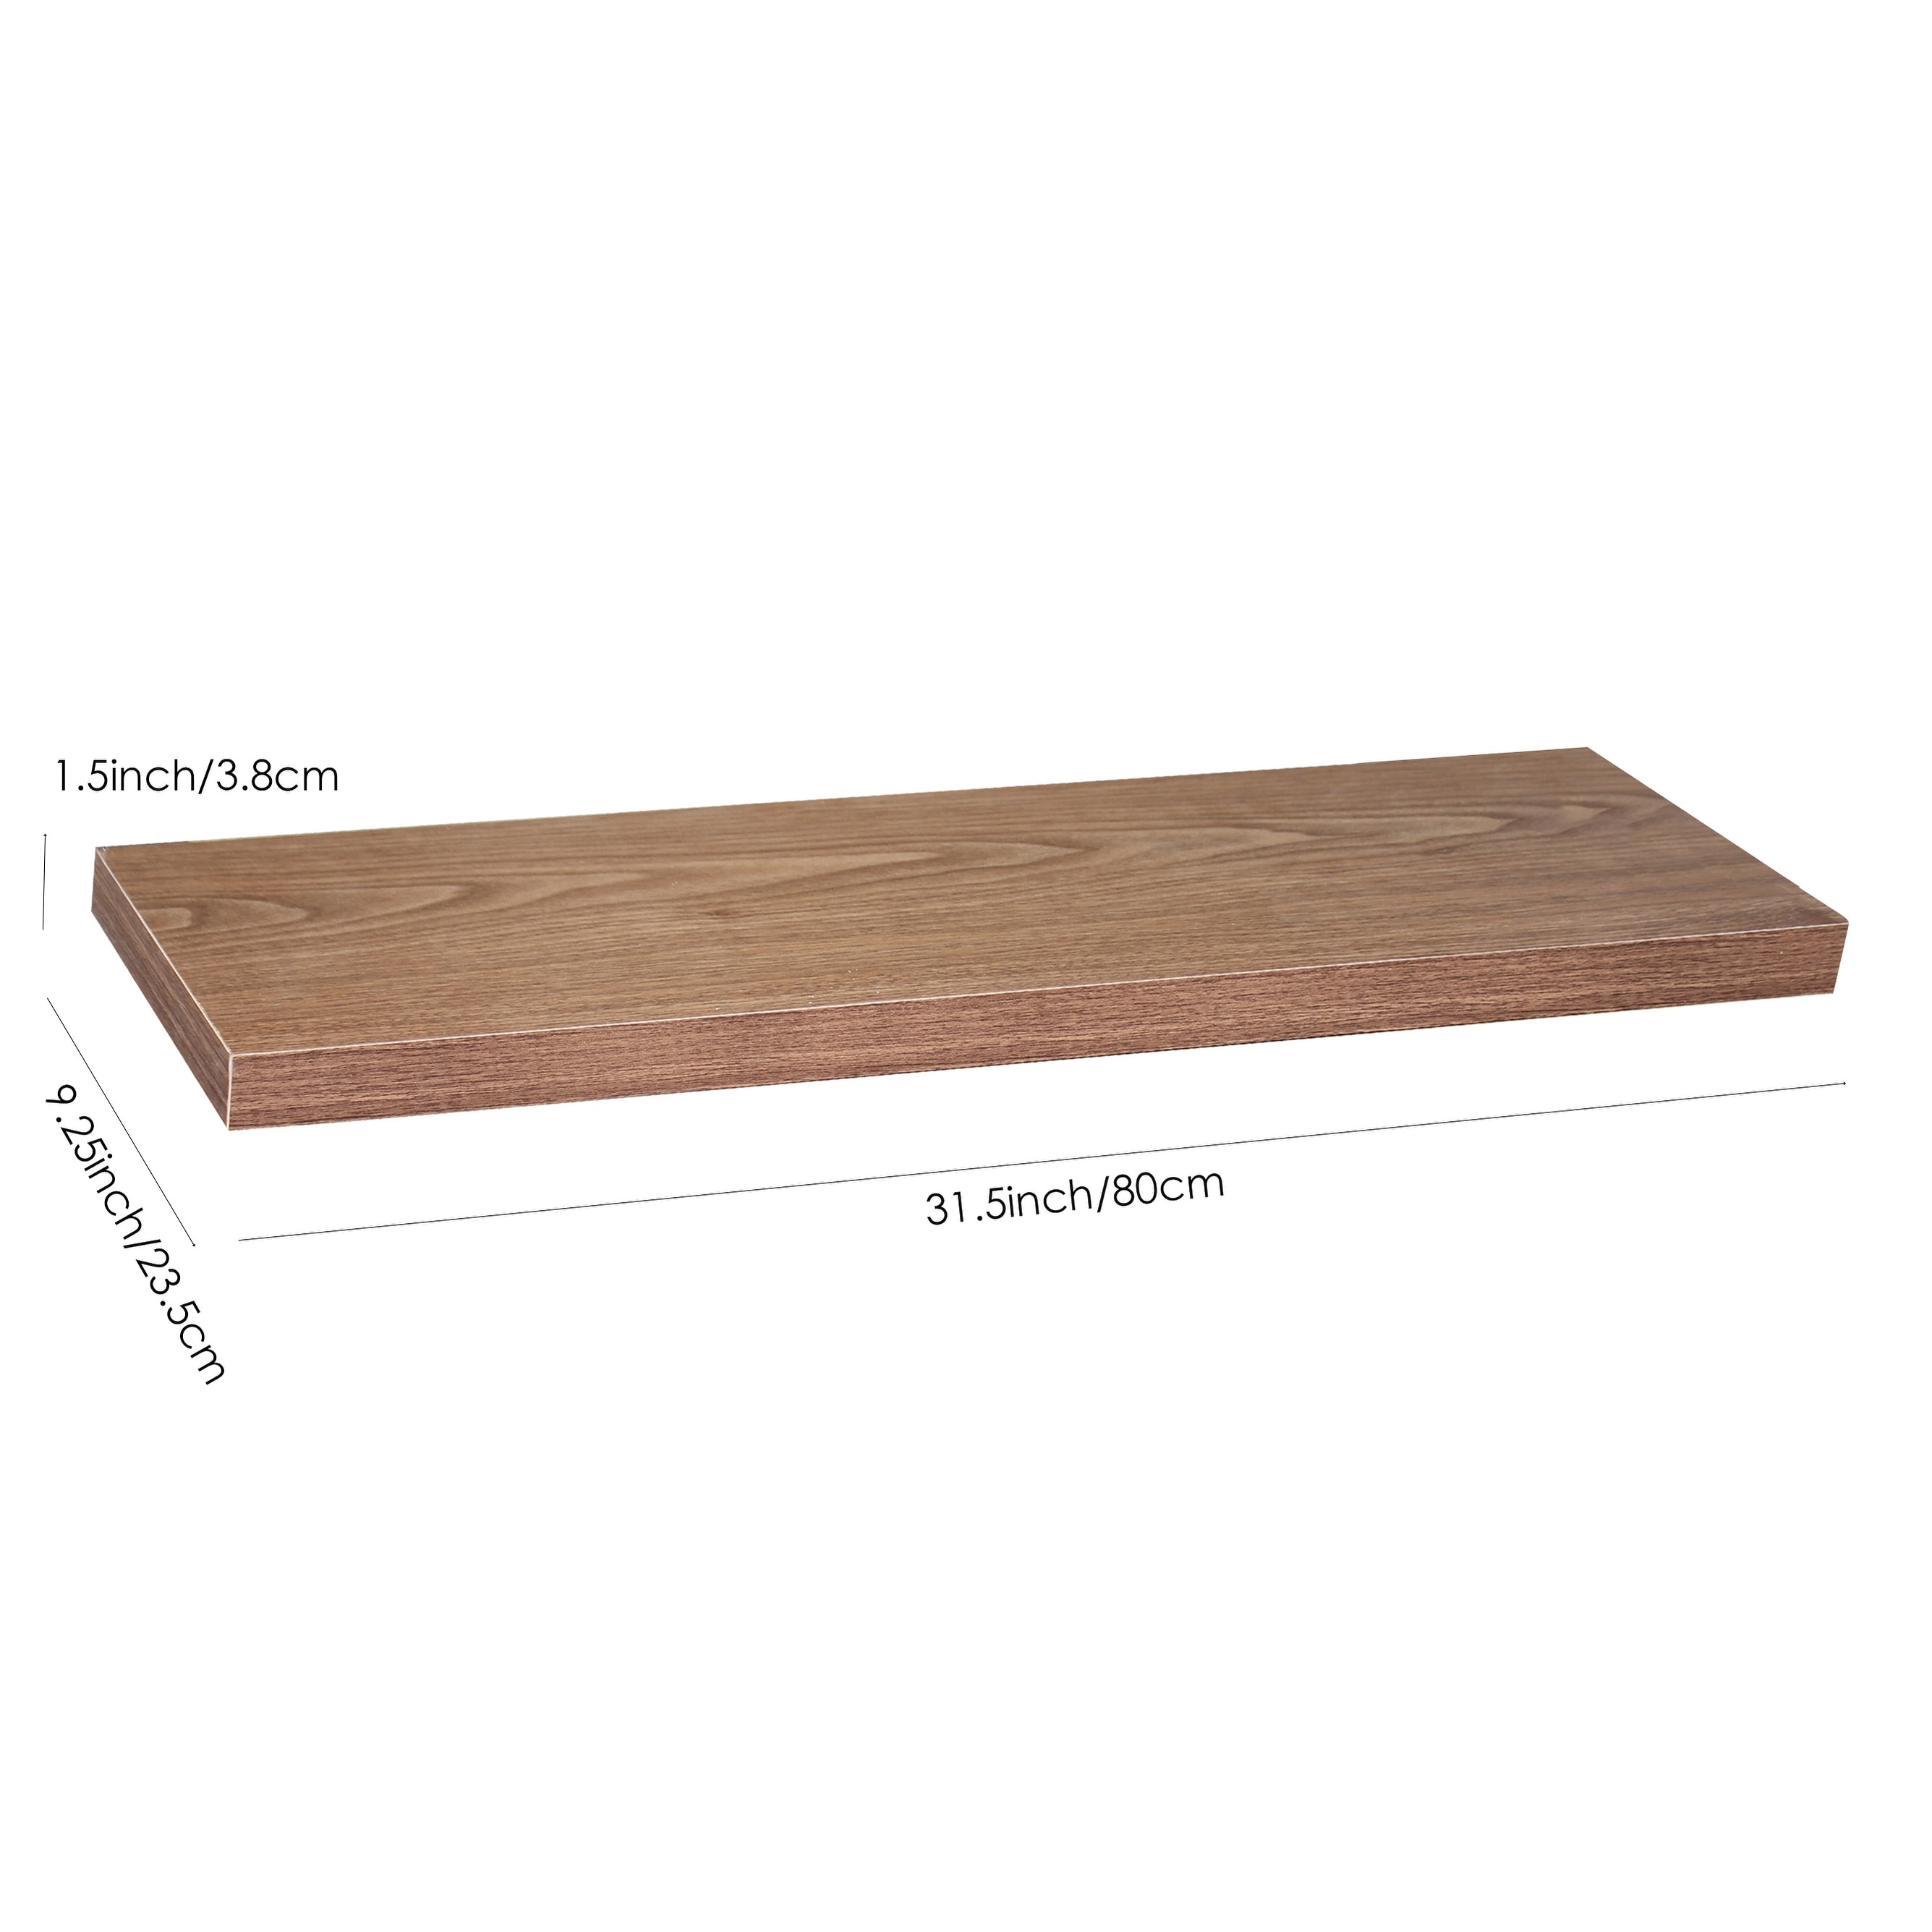 https://ak1.ostkcdn.com/images/products/is/images/direct/aa585184a03a435afa8ed45fd73bc12b6dc03fdf/Set-of-2-Modern-and-Contemporary-JD-Walnut-Floating-Shelf.jpg